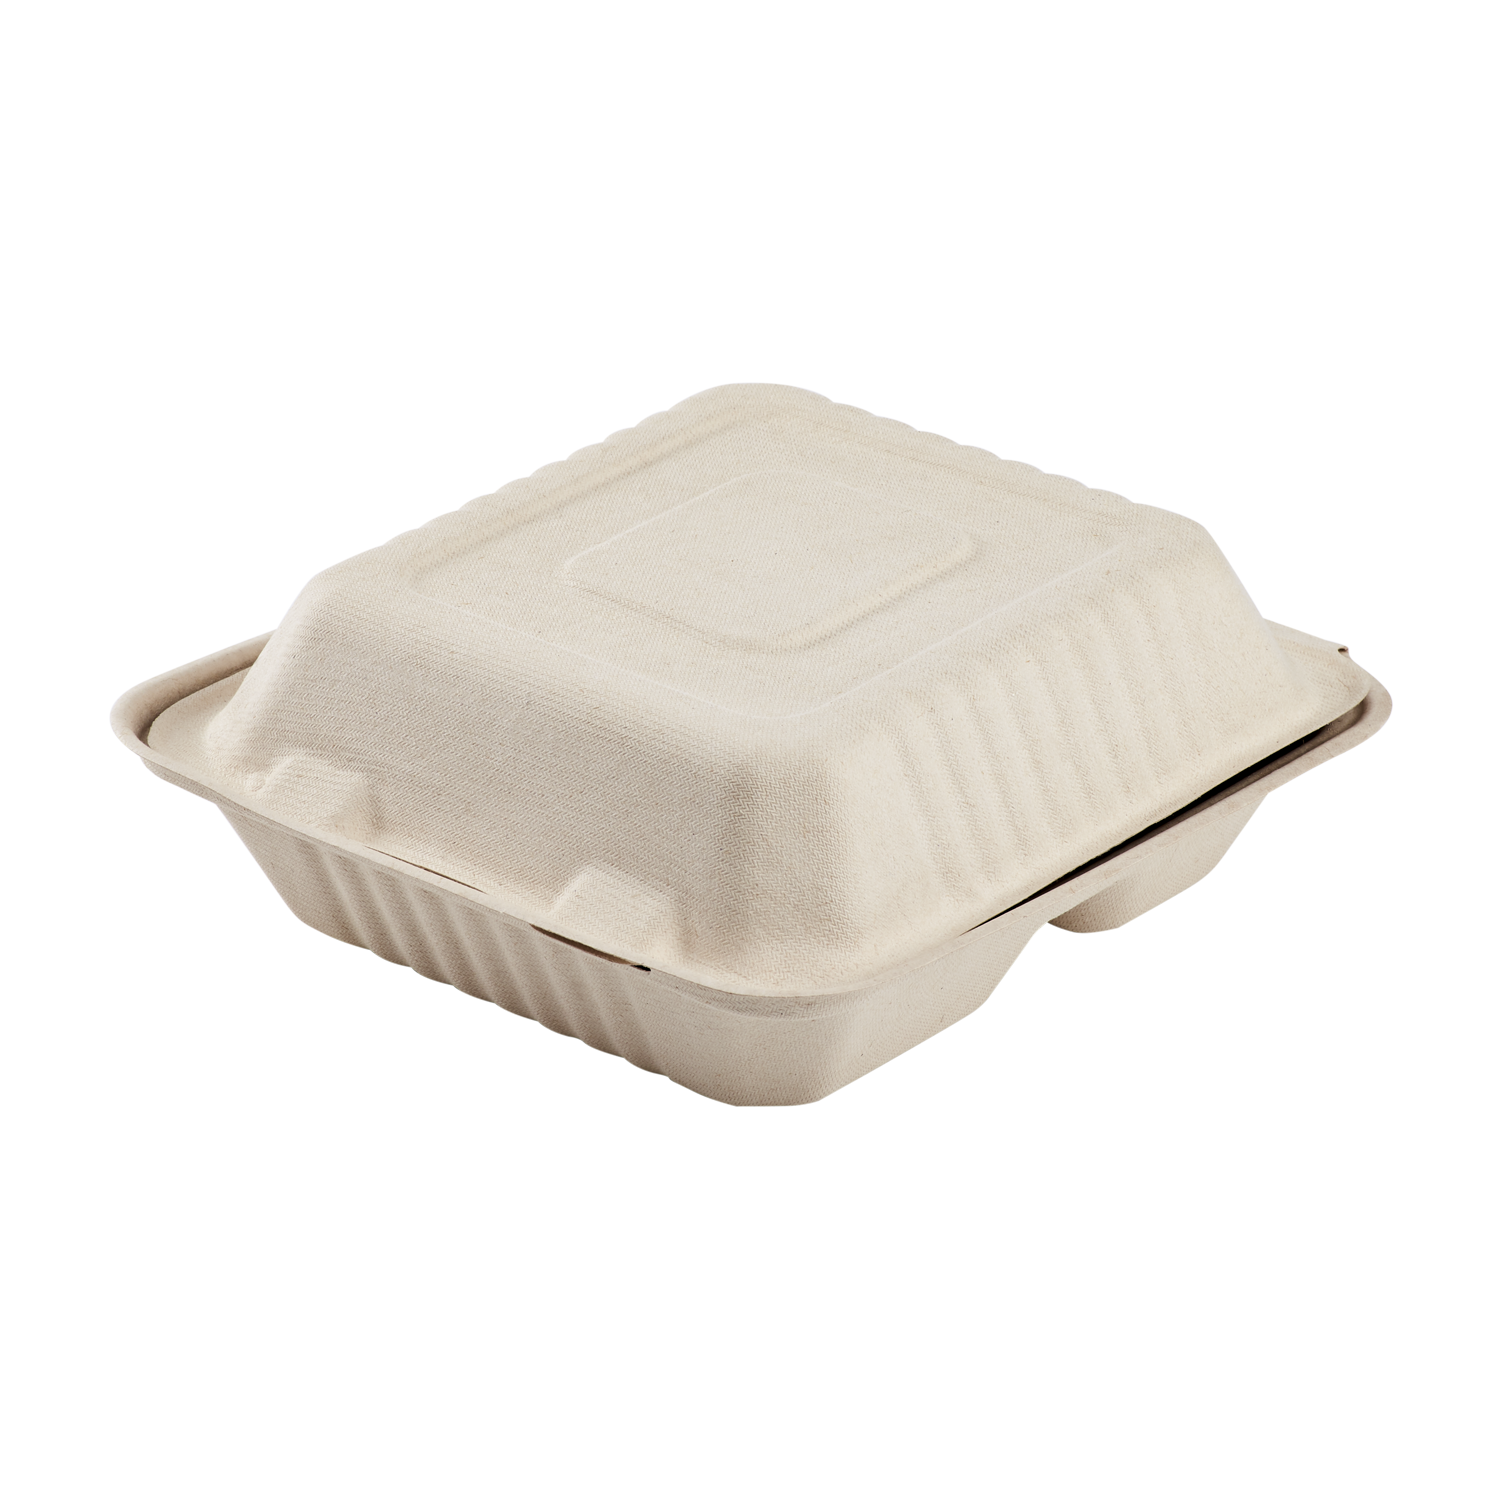 Termo Envases Foam 3-Compartment Carryout Container, 8 x 8 (200 ct.)